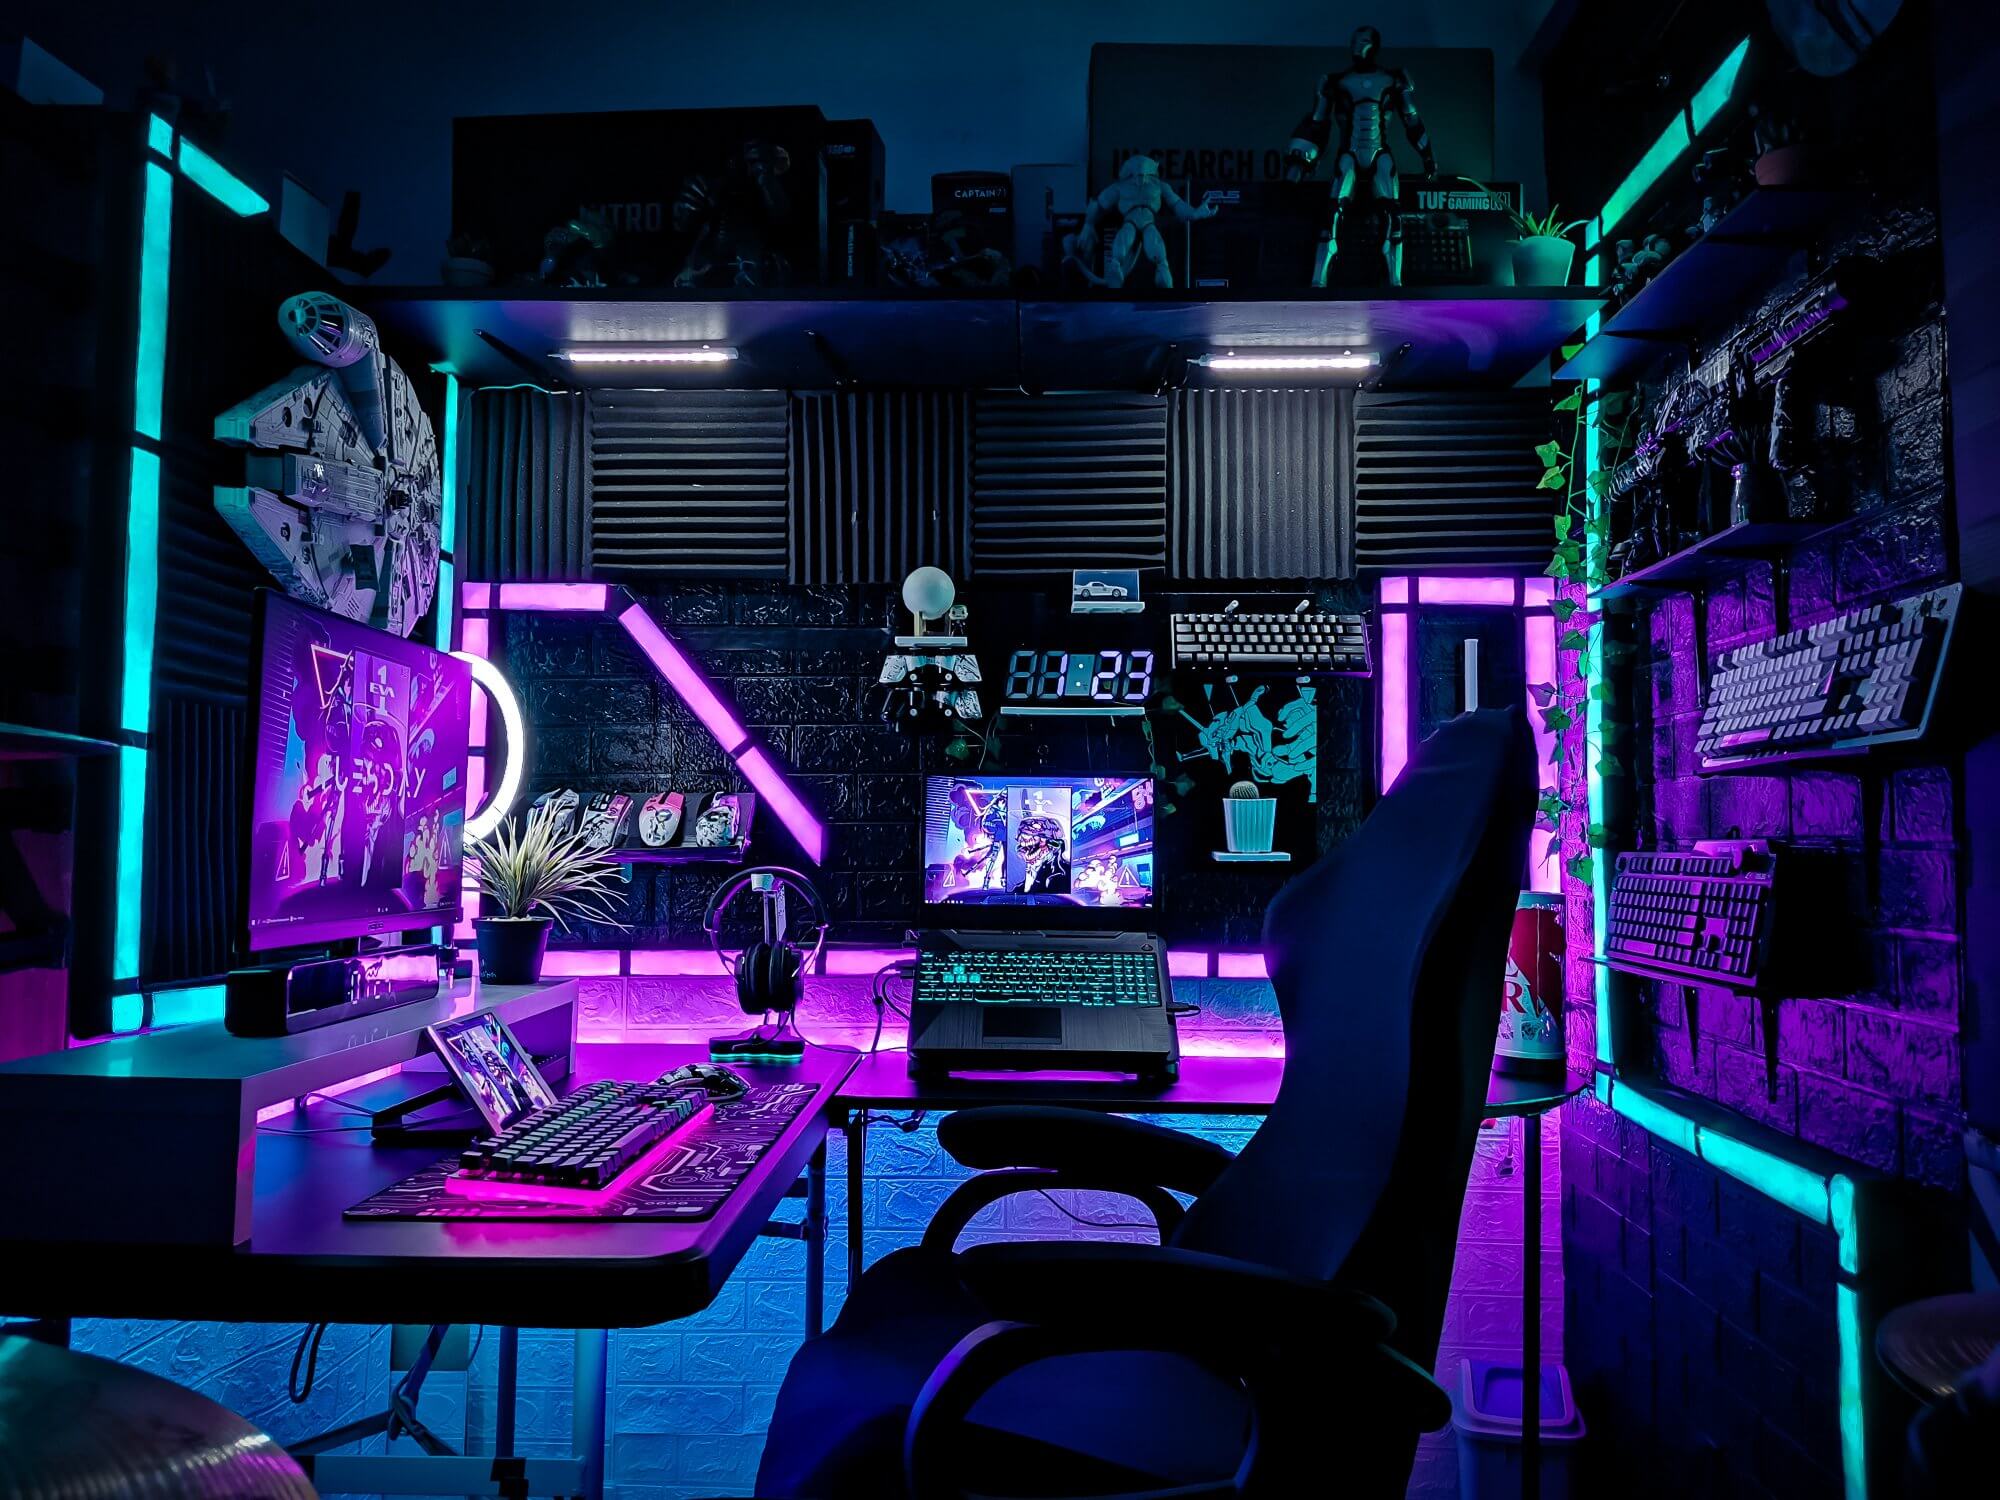 A real-life cyberpunk desk setup in the Philippines